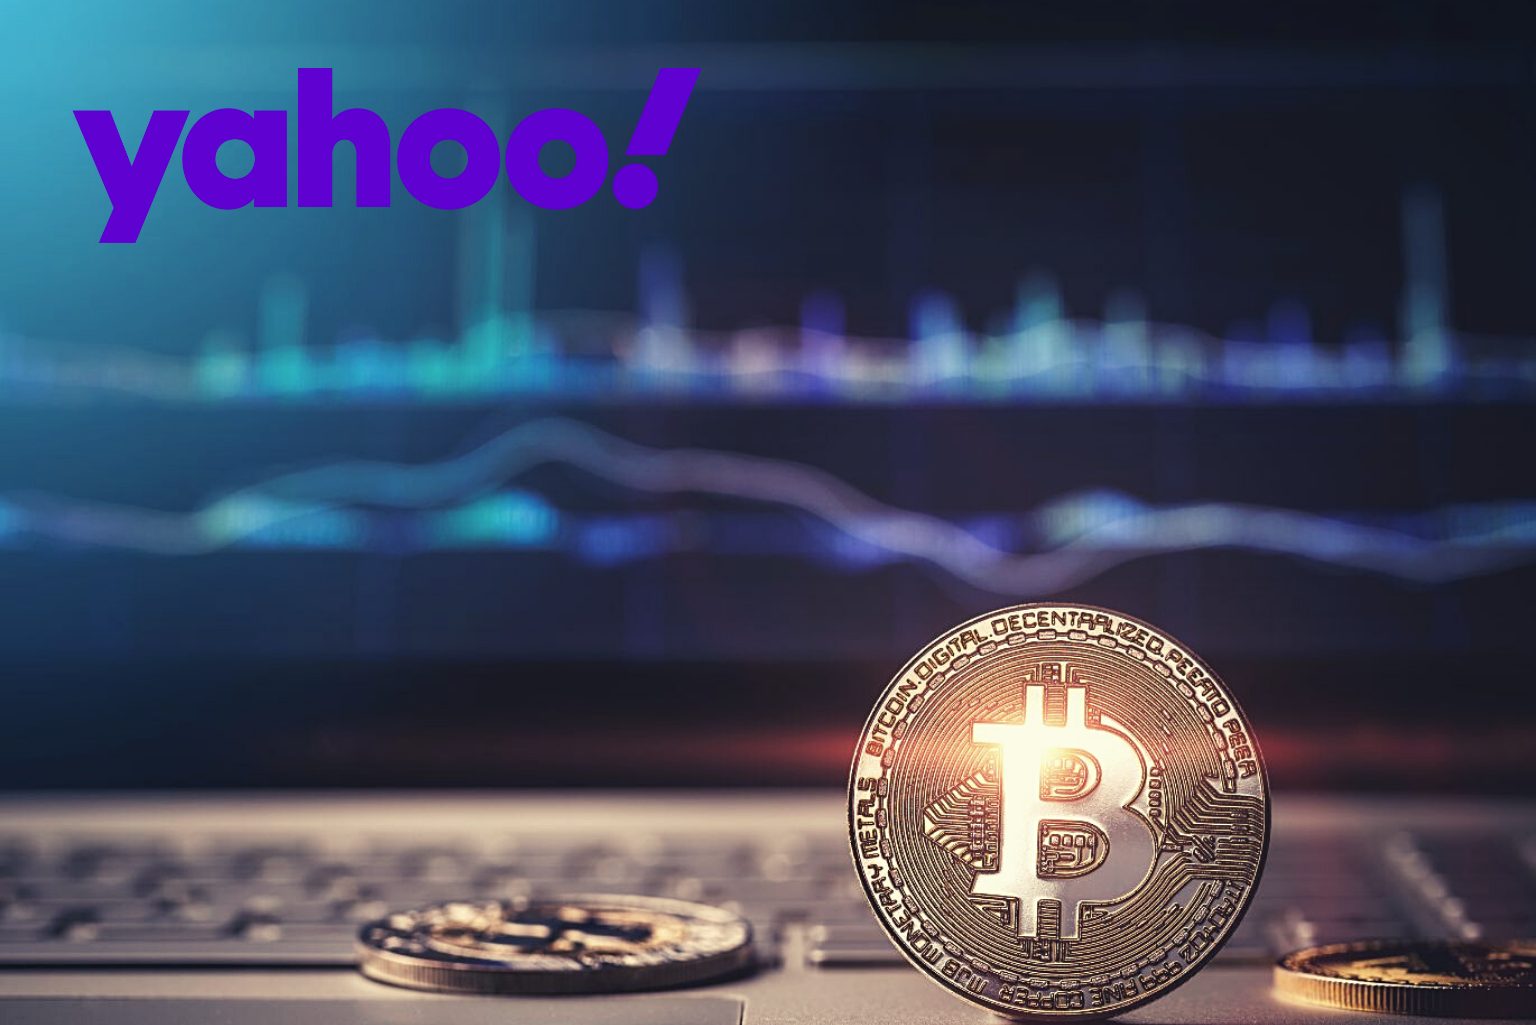 yahoo Dr Jugenburg sixsurery first clinic in canada to accept cryptocurrency bitcoin